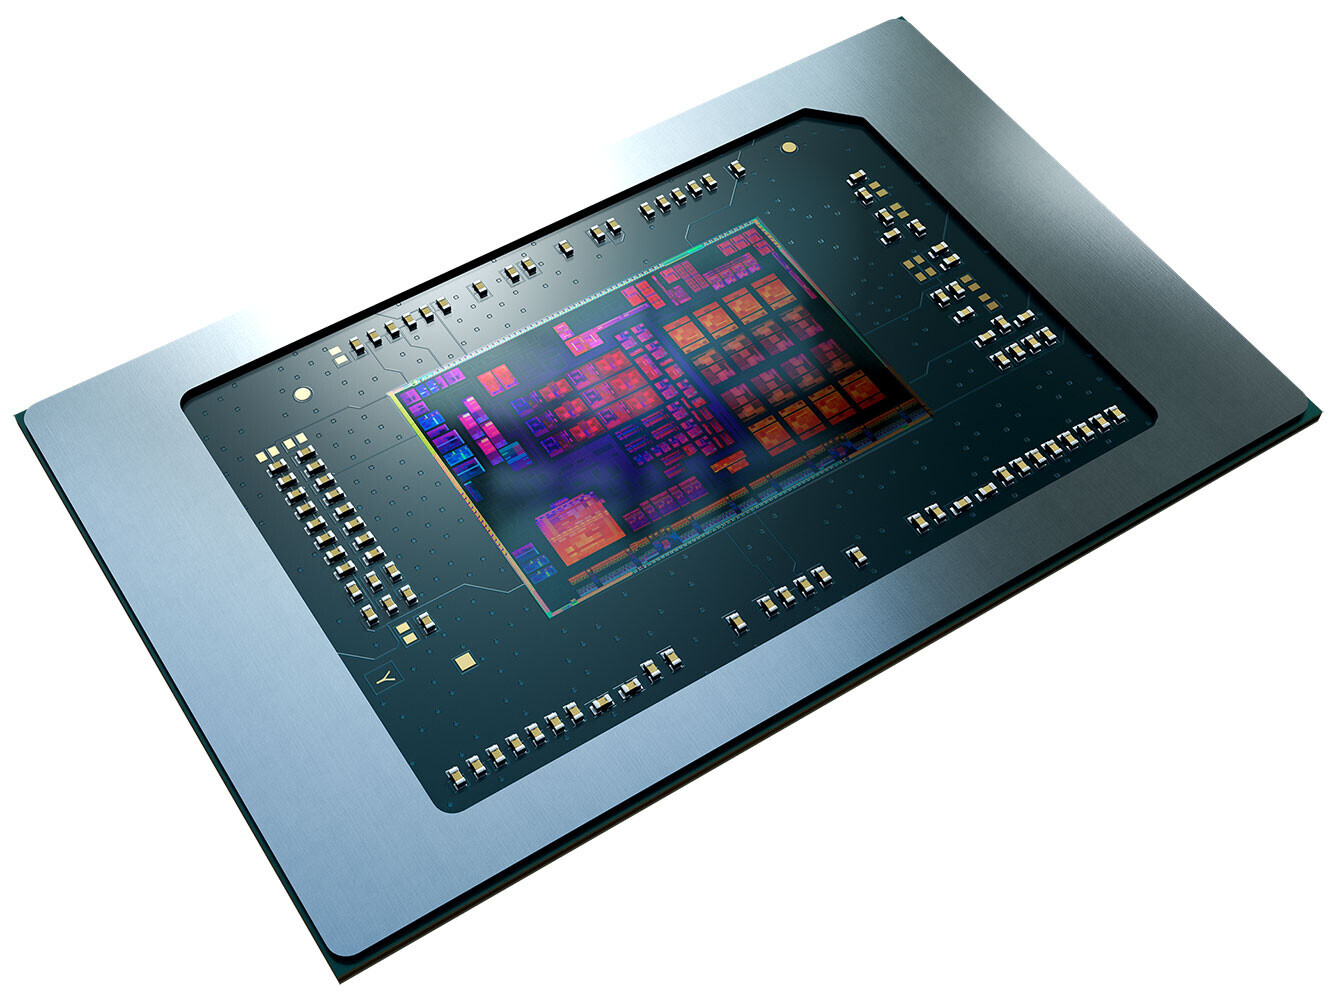 AMD Ryzen 8000: All we know about the Zen 5 chips